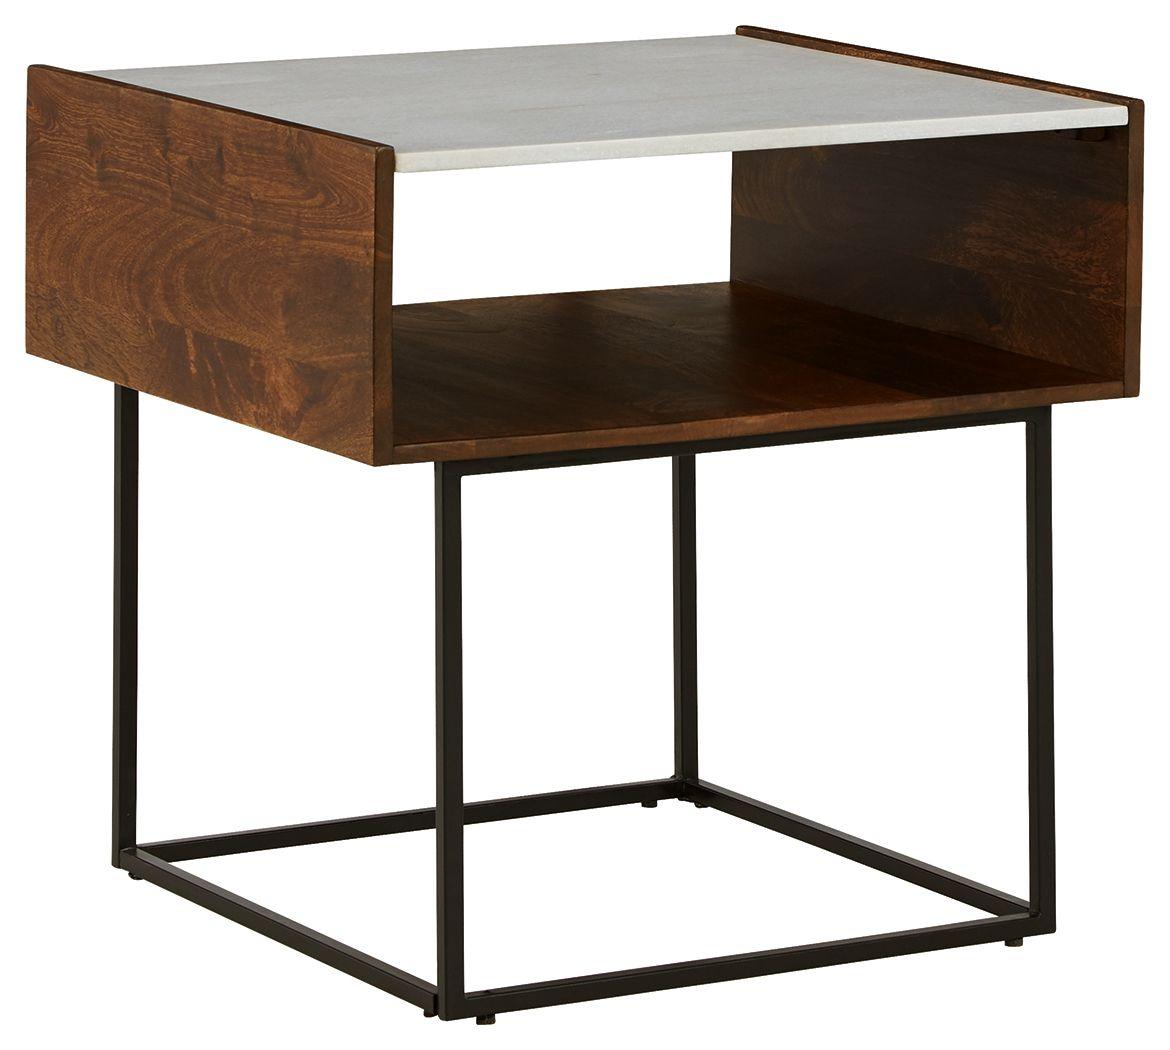 Rusitori - Brown / Beige / White - Rectangular End Table Tony's Home Furnishings Furniture. Beds. Dressers. Sofas.